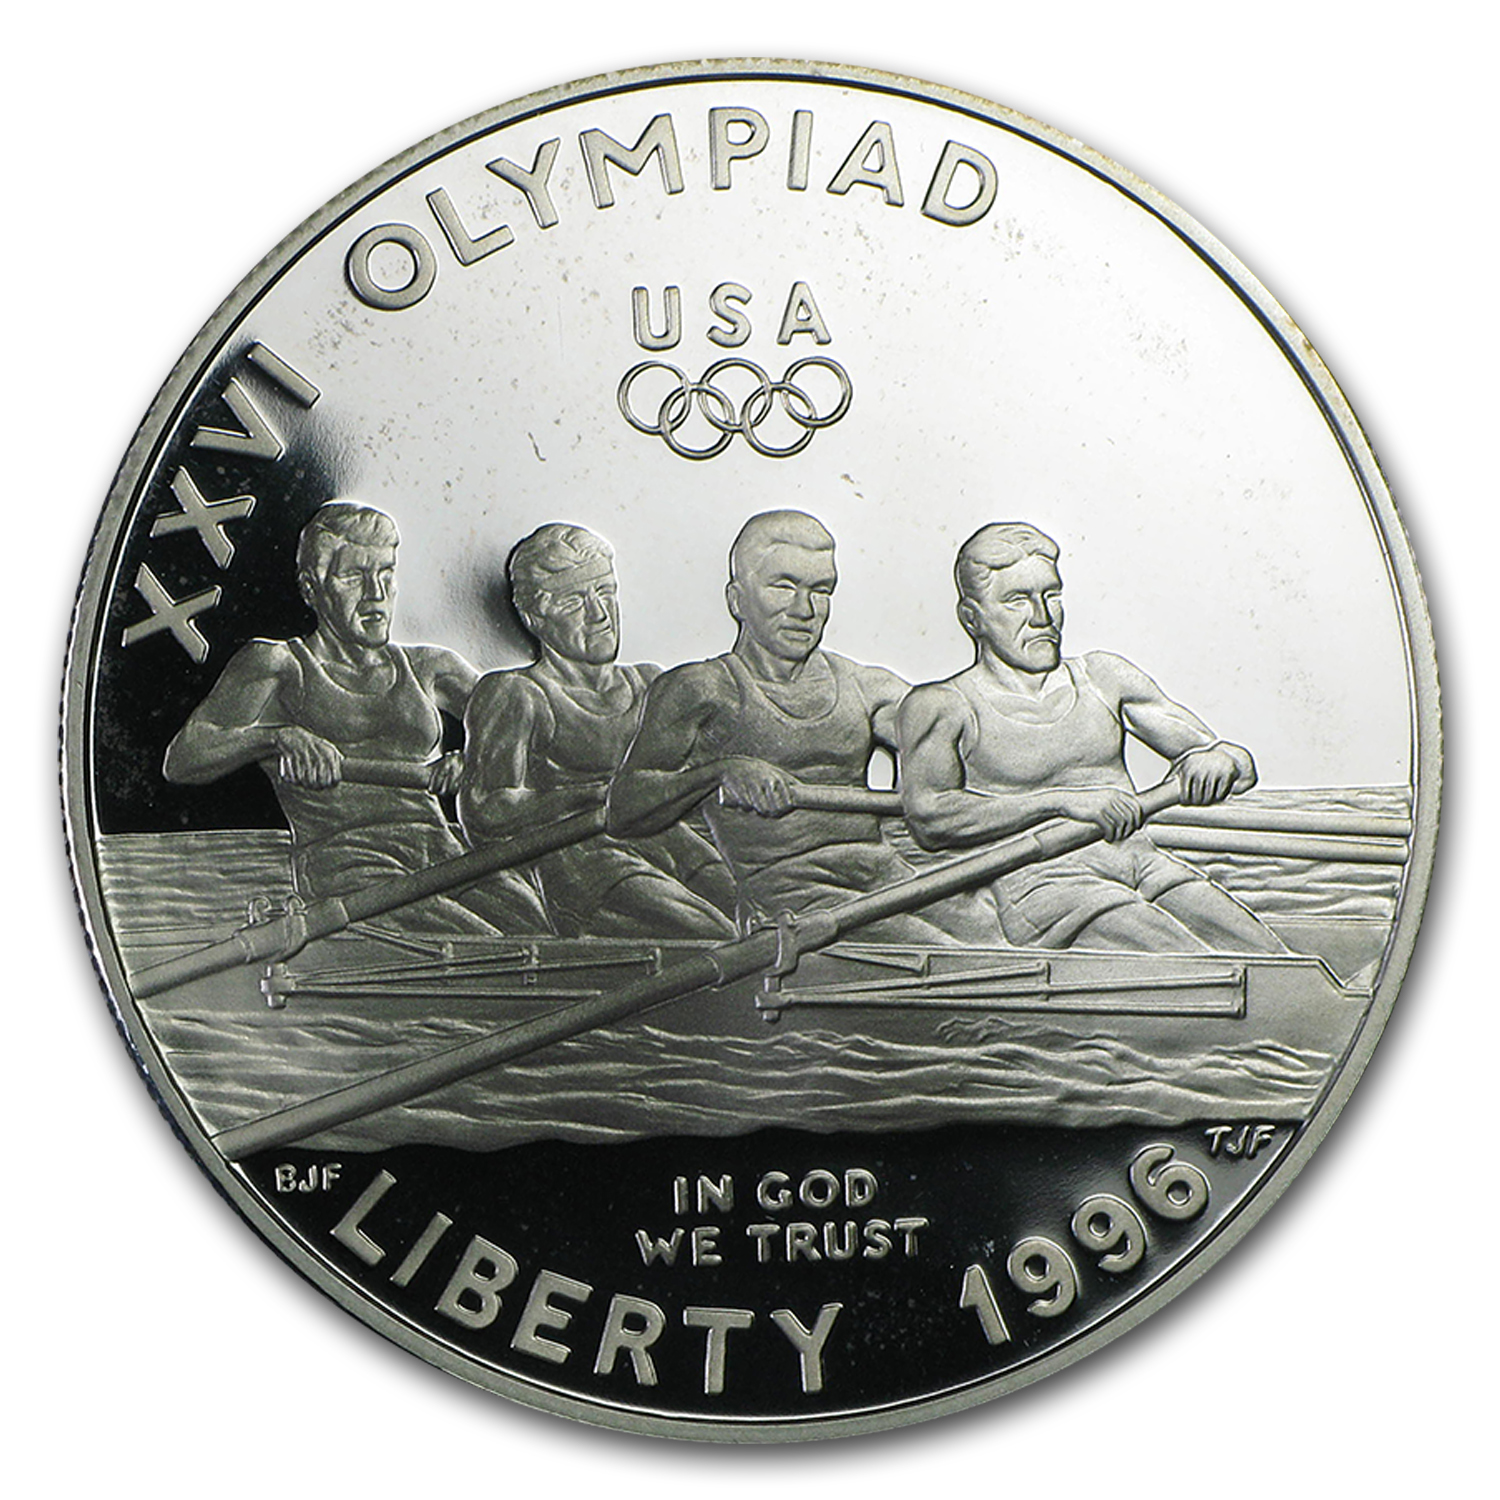 Buy 1996-P Olympic Rowing $1 Silver Commem Proof (Capsule Only)